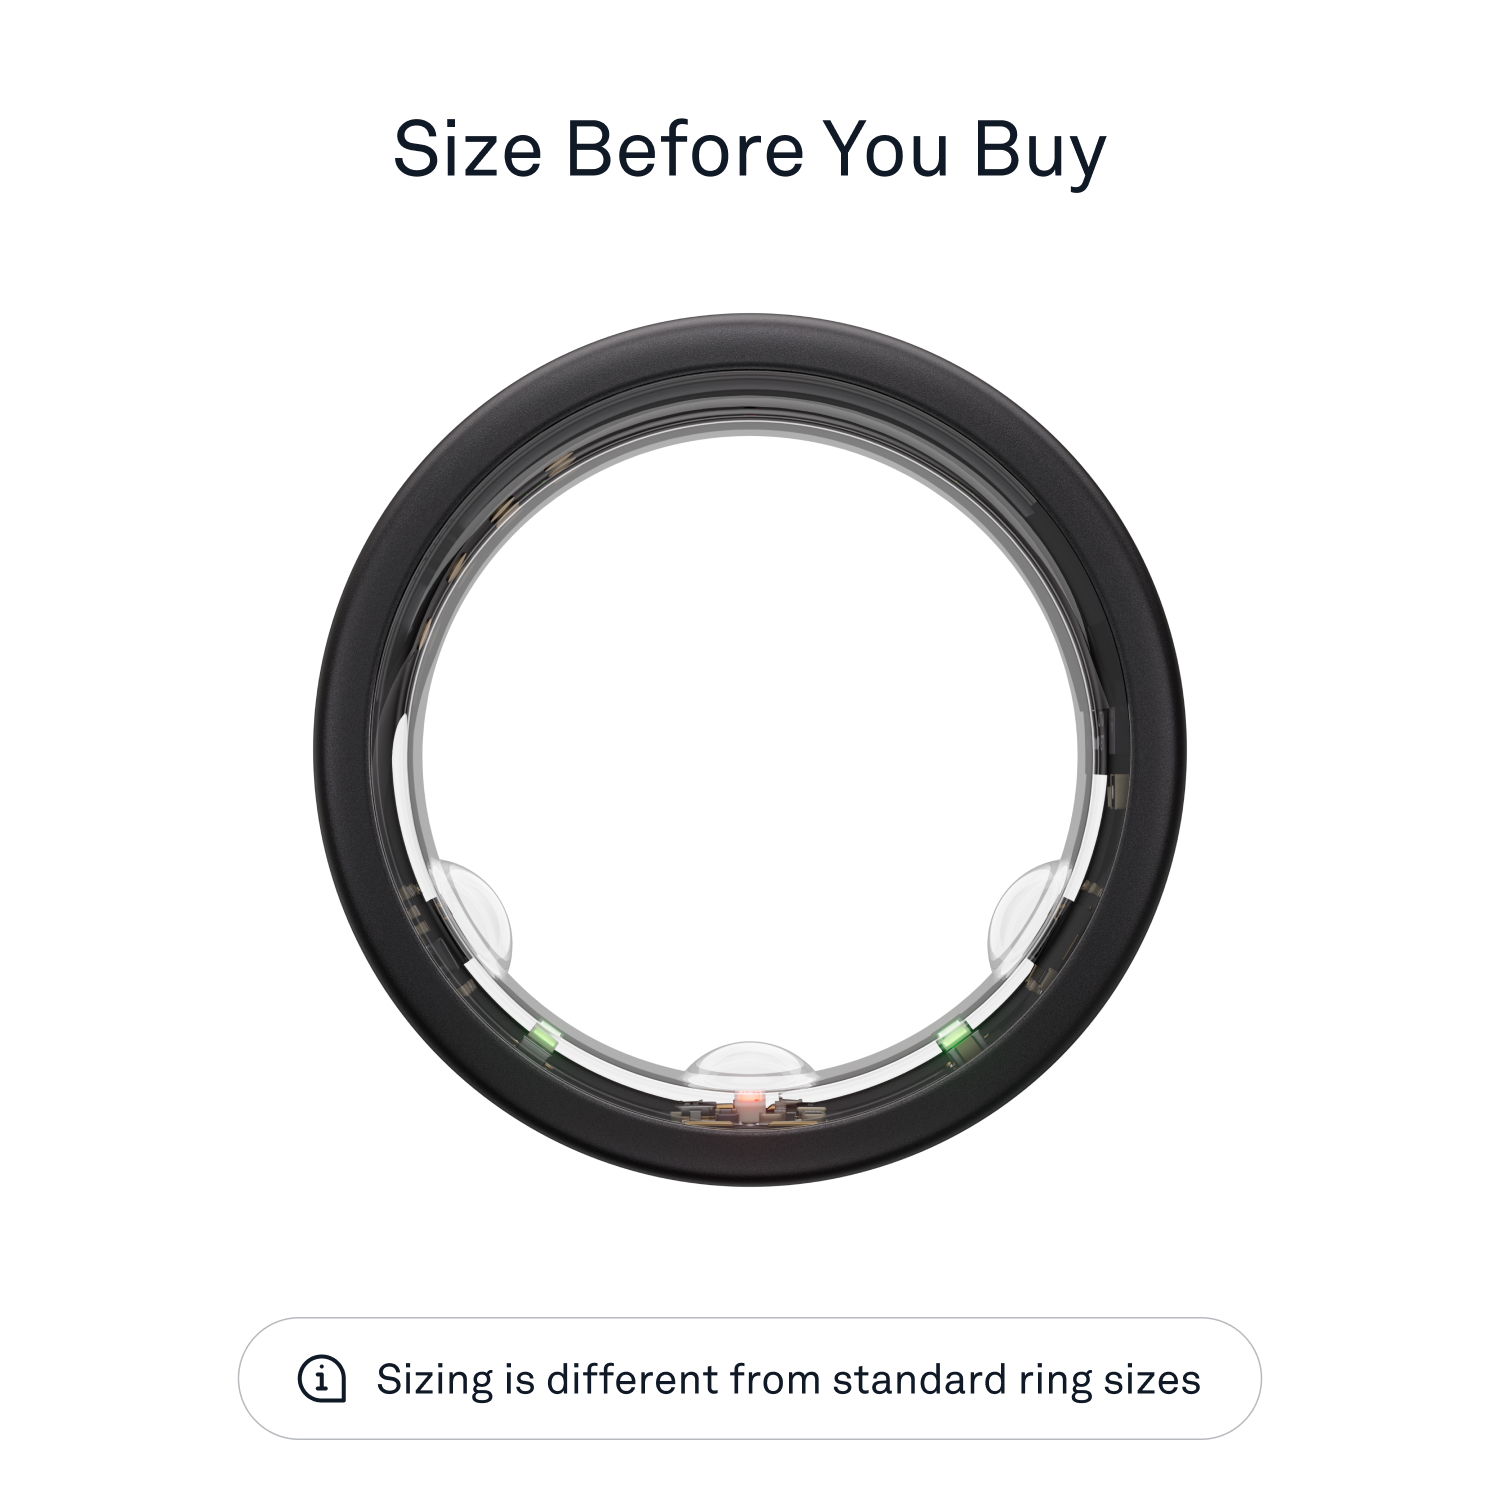 Oura Ring Gen3 Horizon Size Before You Buy Size 10 Stealth JZ90-51385-10 -  Best Buy